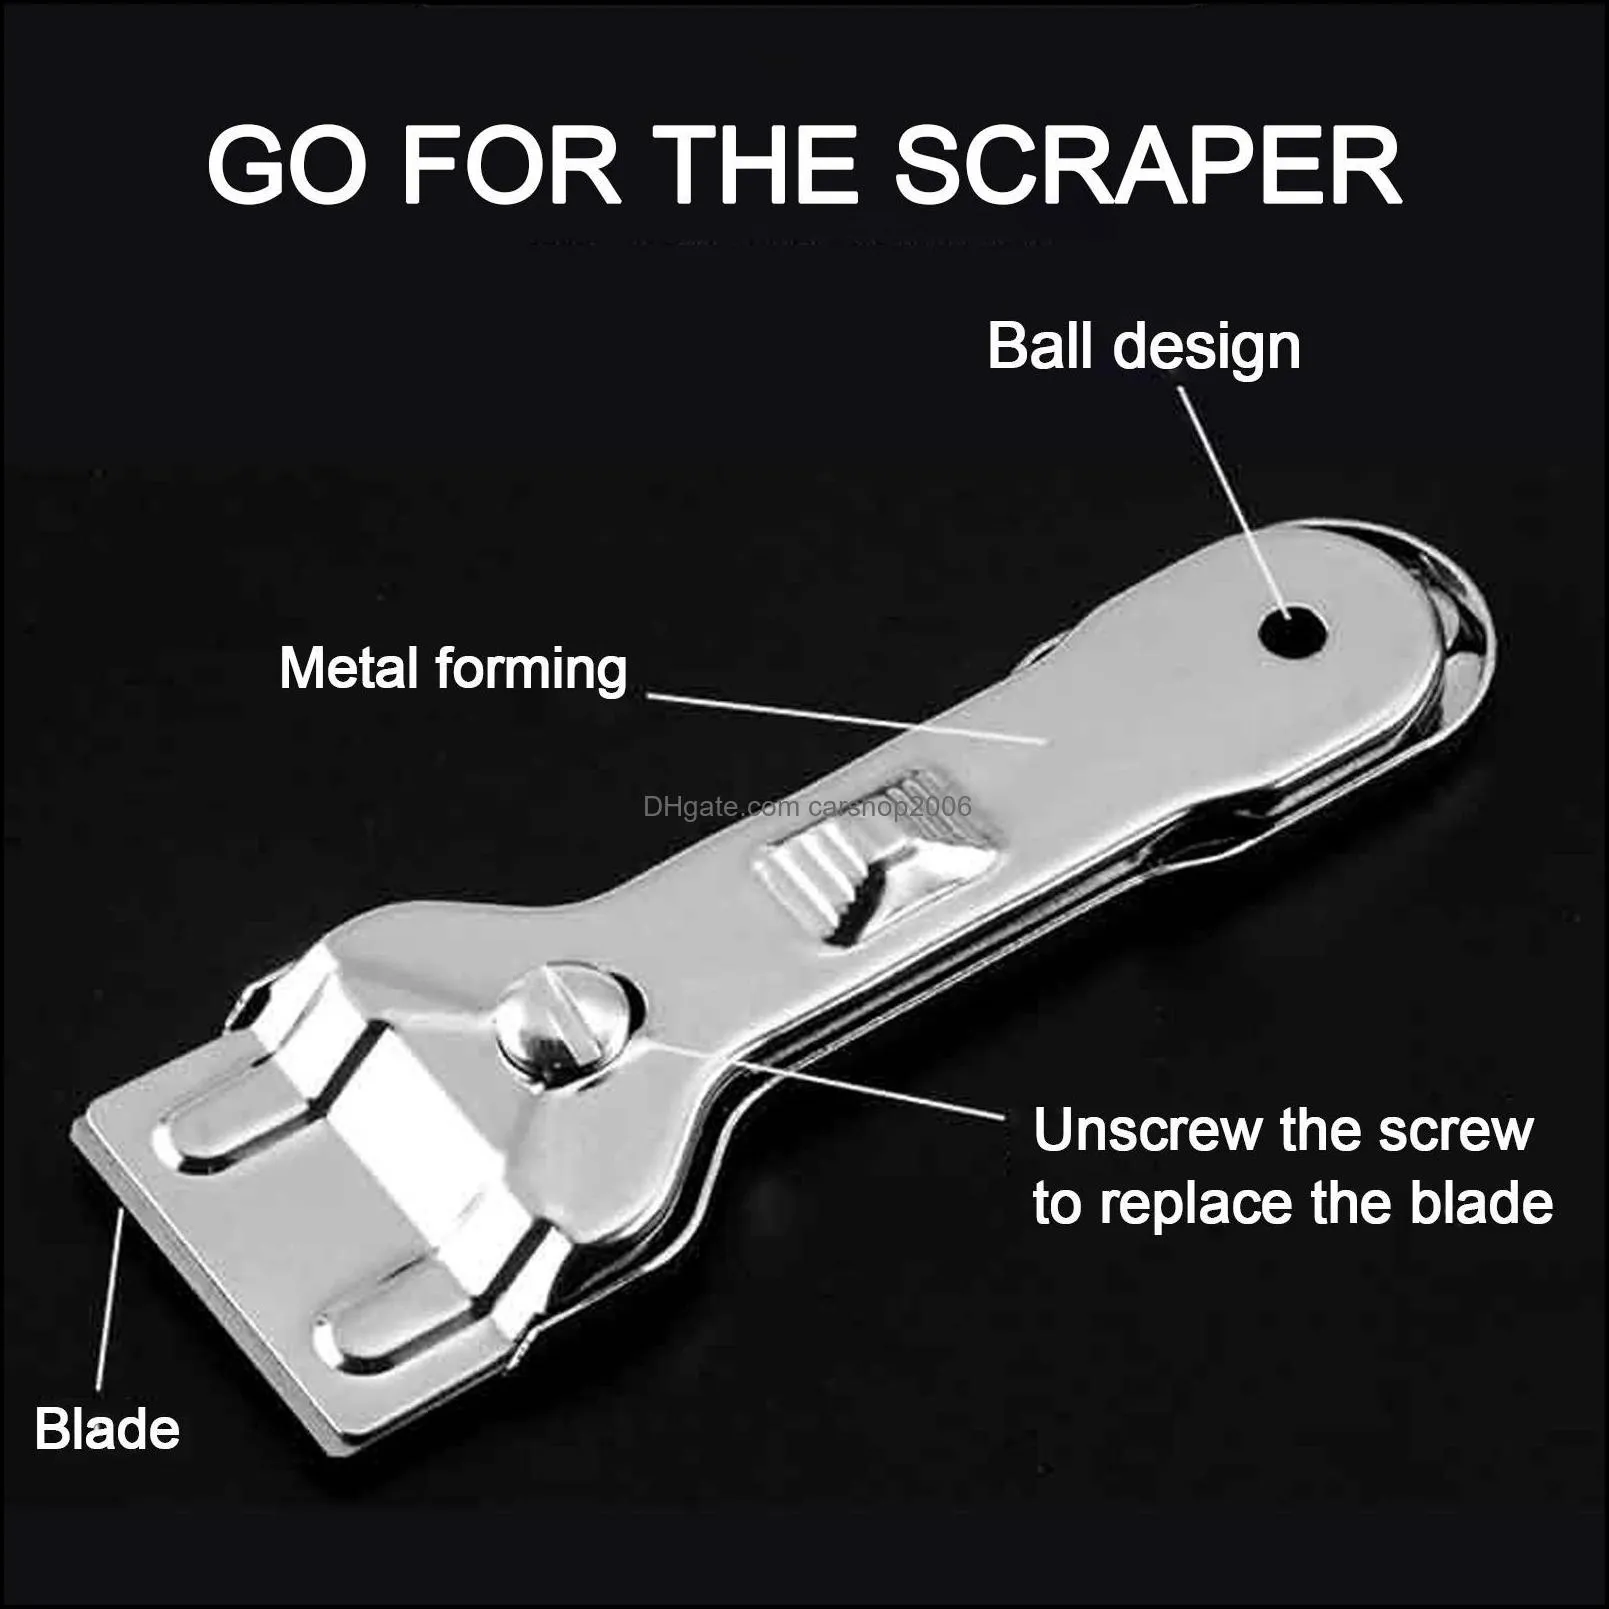 Glass Brushes Multifunction Stainless Steel Ceramic Hob Scraper Cleaner Tool With Blade Cleaning Oven Cooker Tools Utility Knife